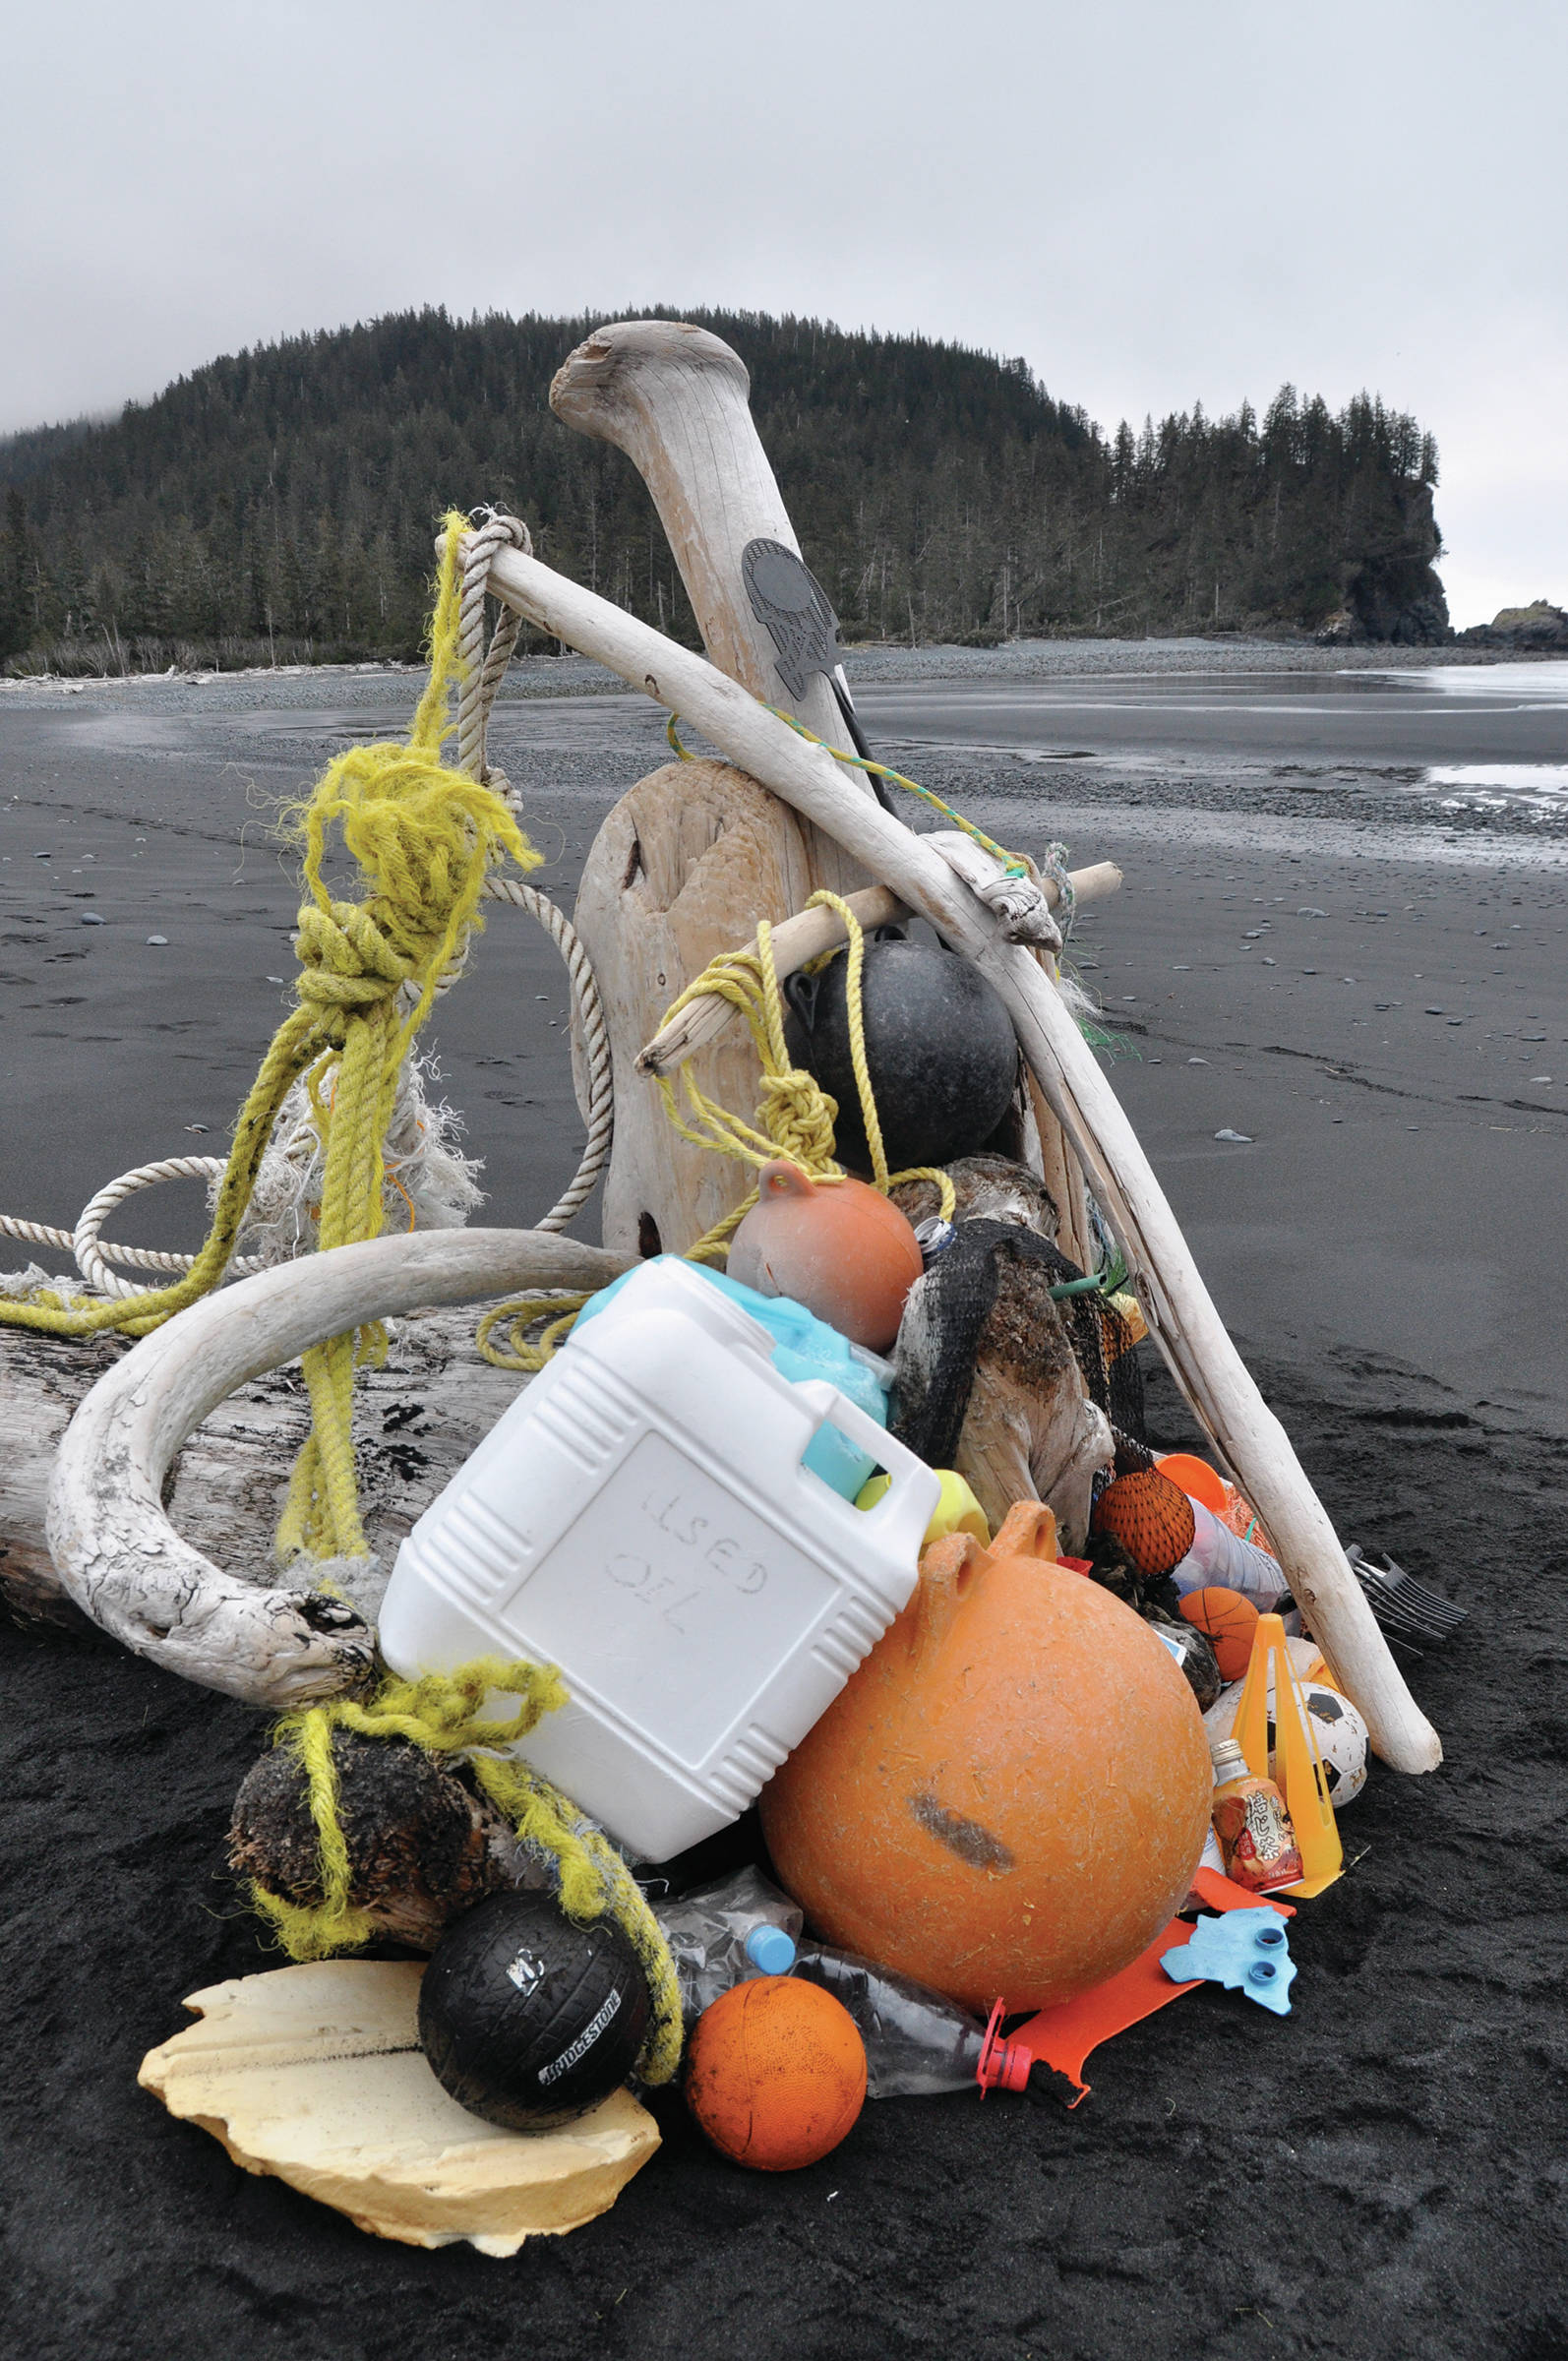 A collection of marine debris found at a clean-up in 2013 at Gore Point, Alaska. (Photo by Tim Steinberg)